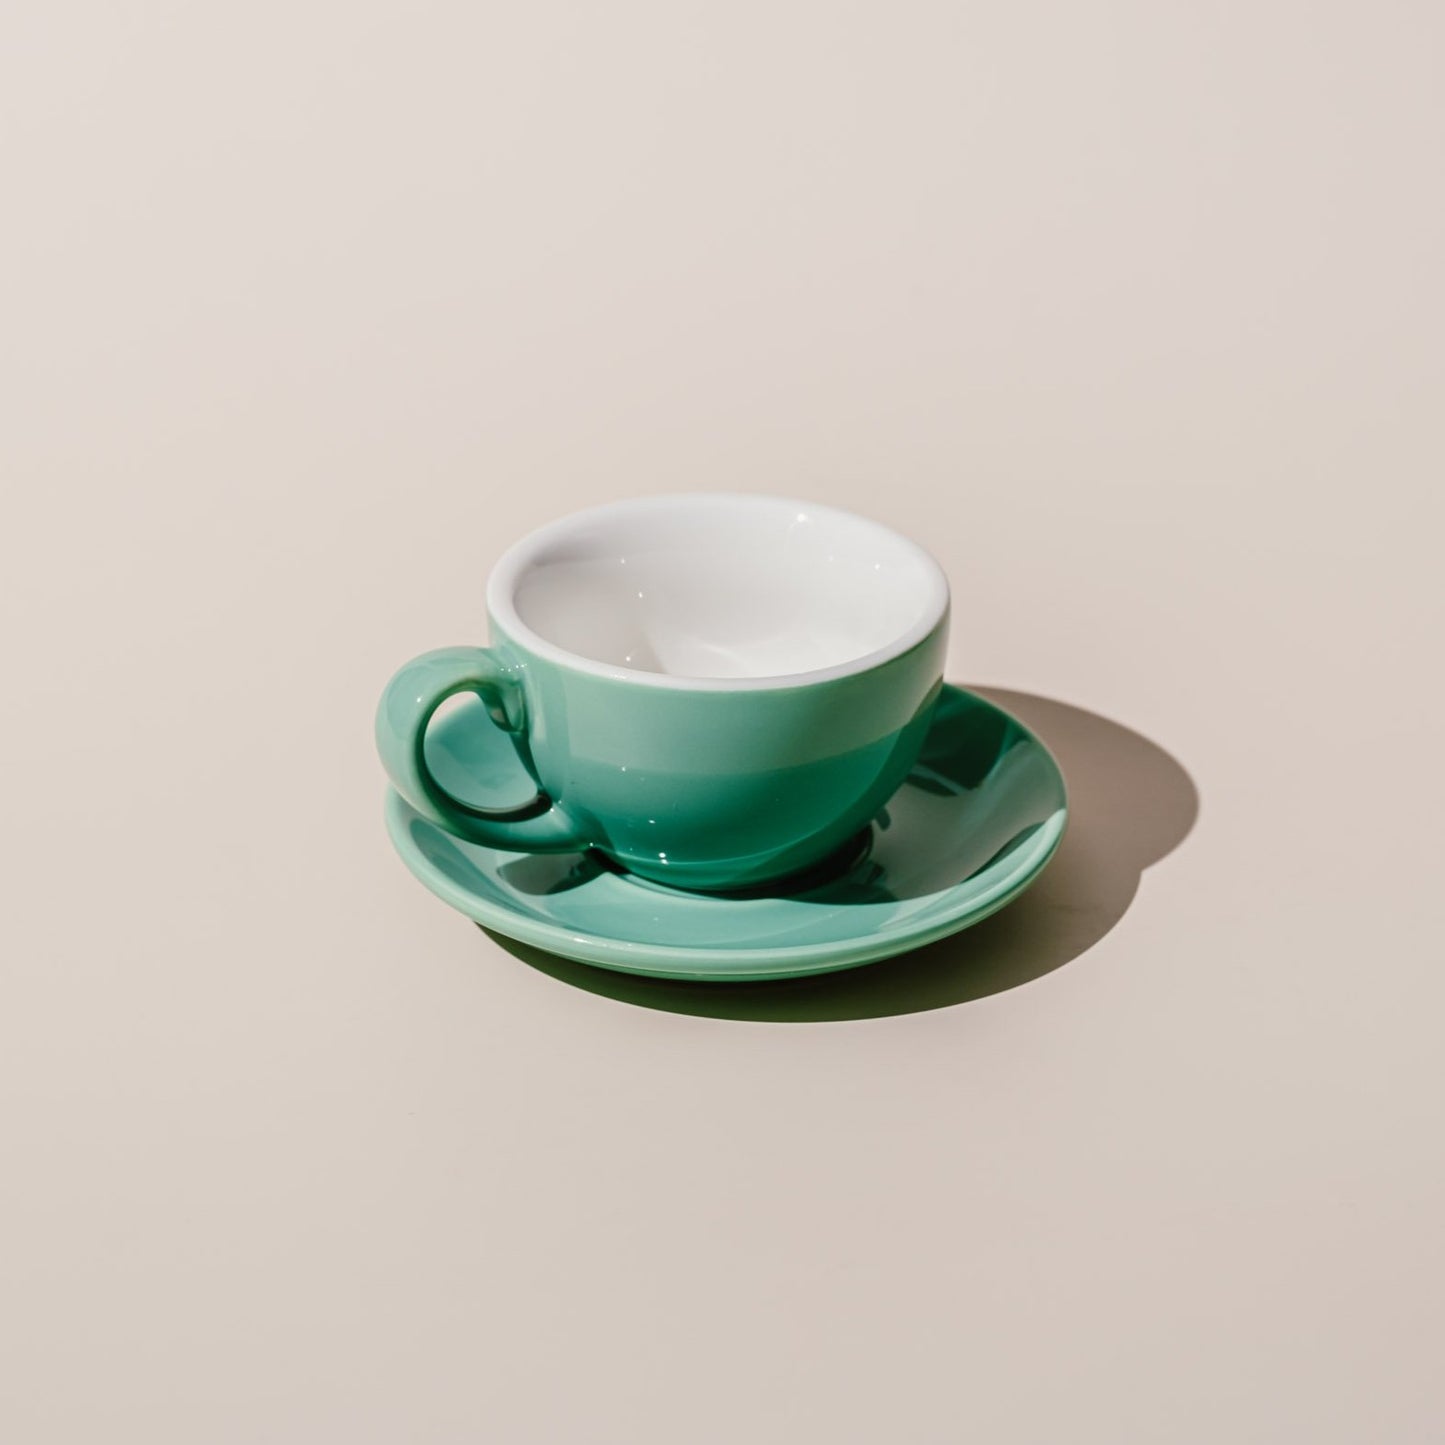 150ml Flat White Egg Cup & Saucer